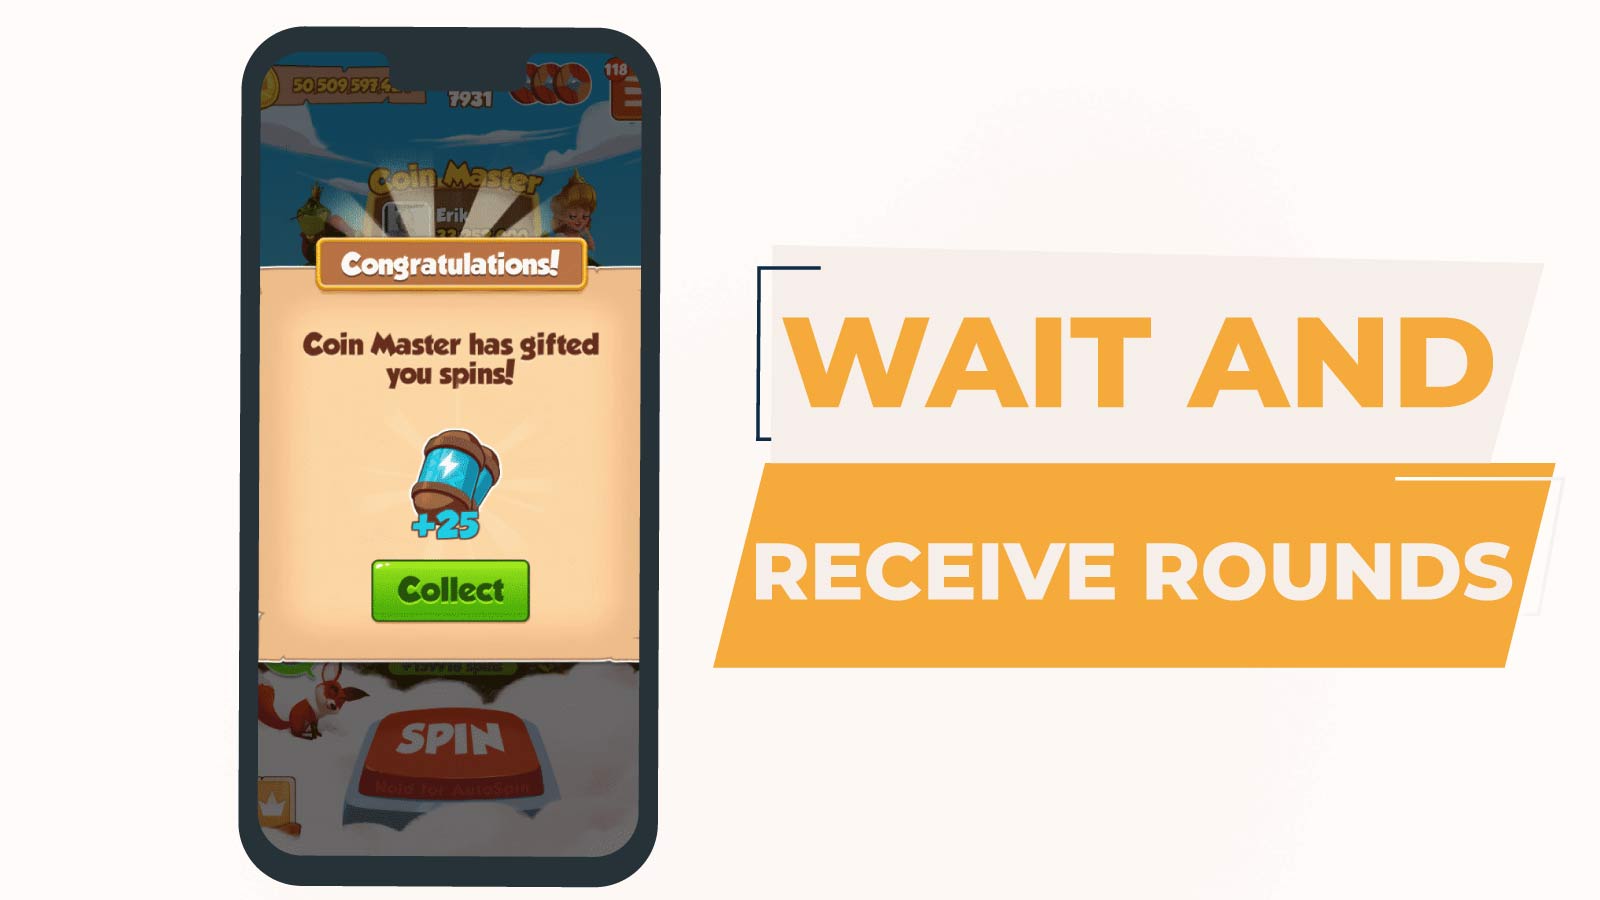 Wait Around and Receive Rounds - Coin Master